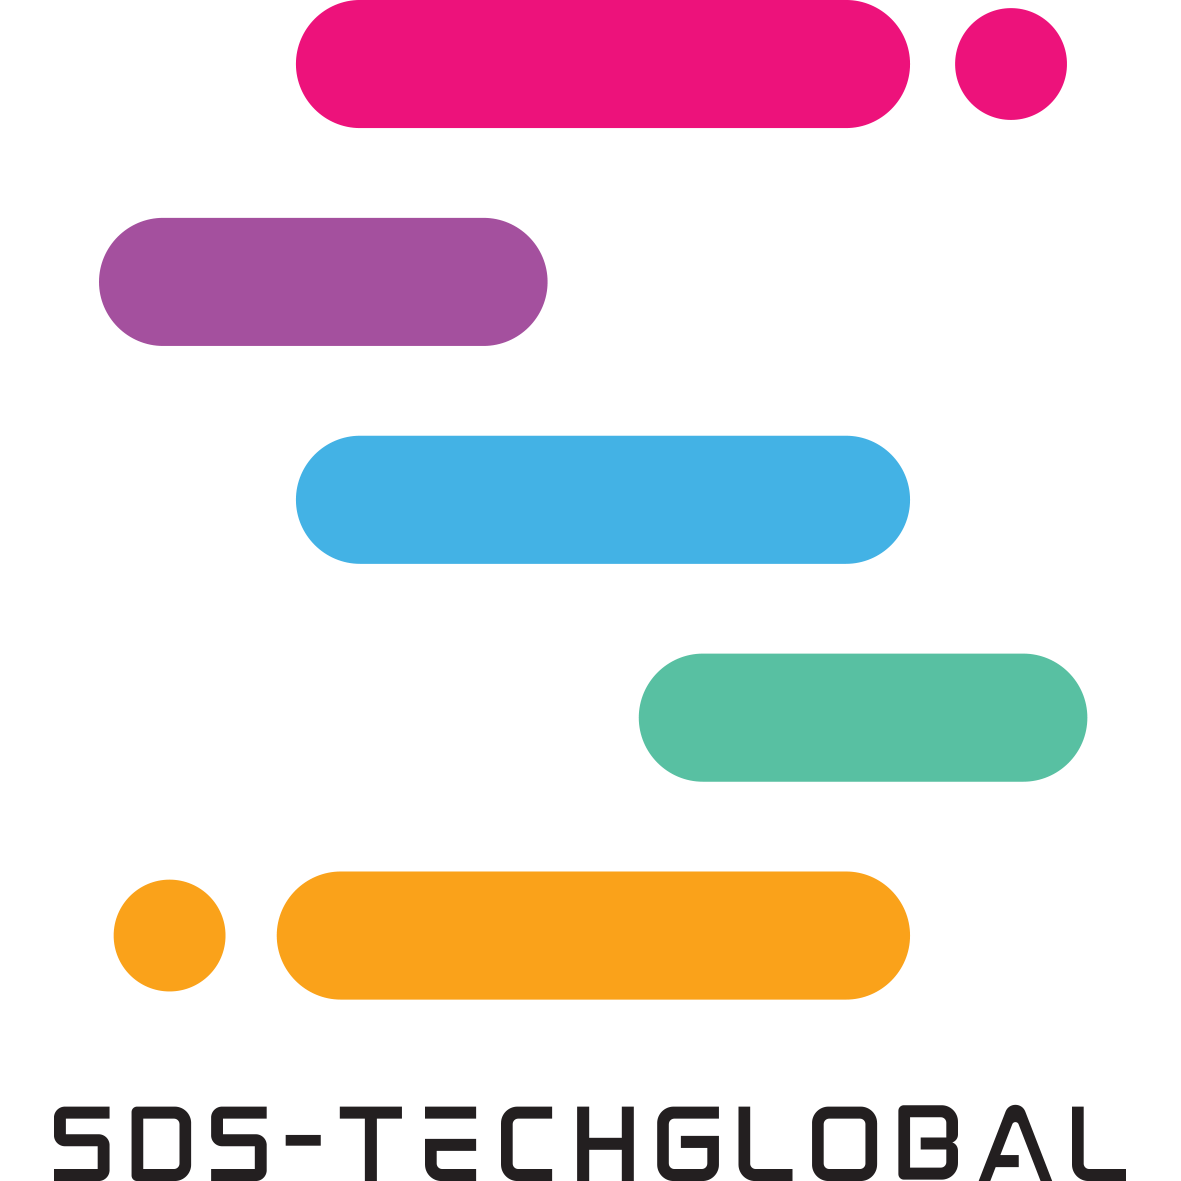 SDS-Techglobal Limited 